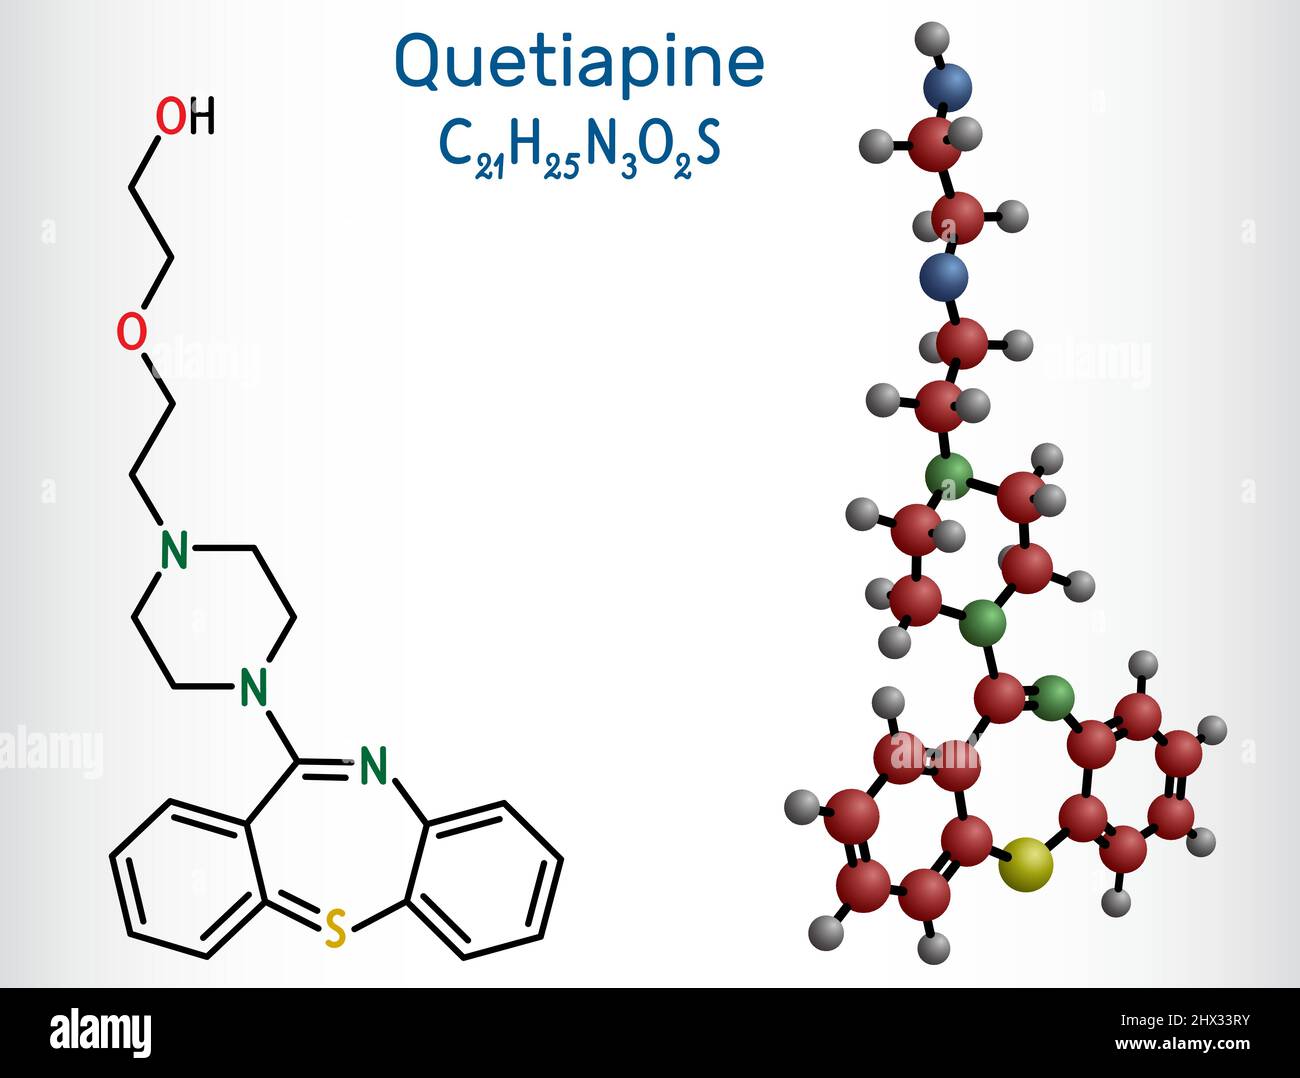 Quetiapine molecule. It is neuroleptic, atypical antipsychotic medication for the treatment of schizophrenia, bipolar disorder. Structural chemical fo Stock Vector